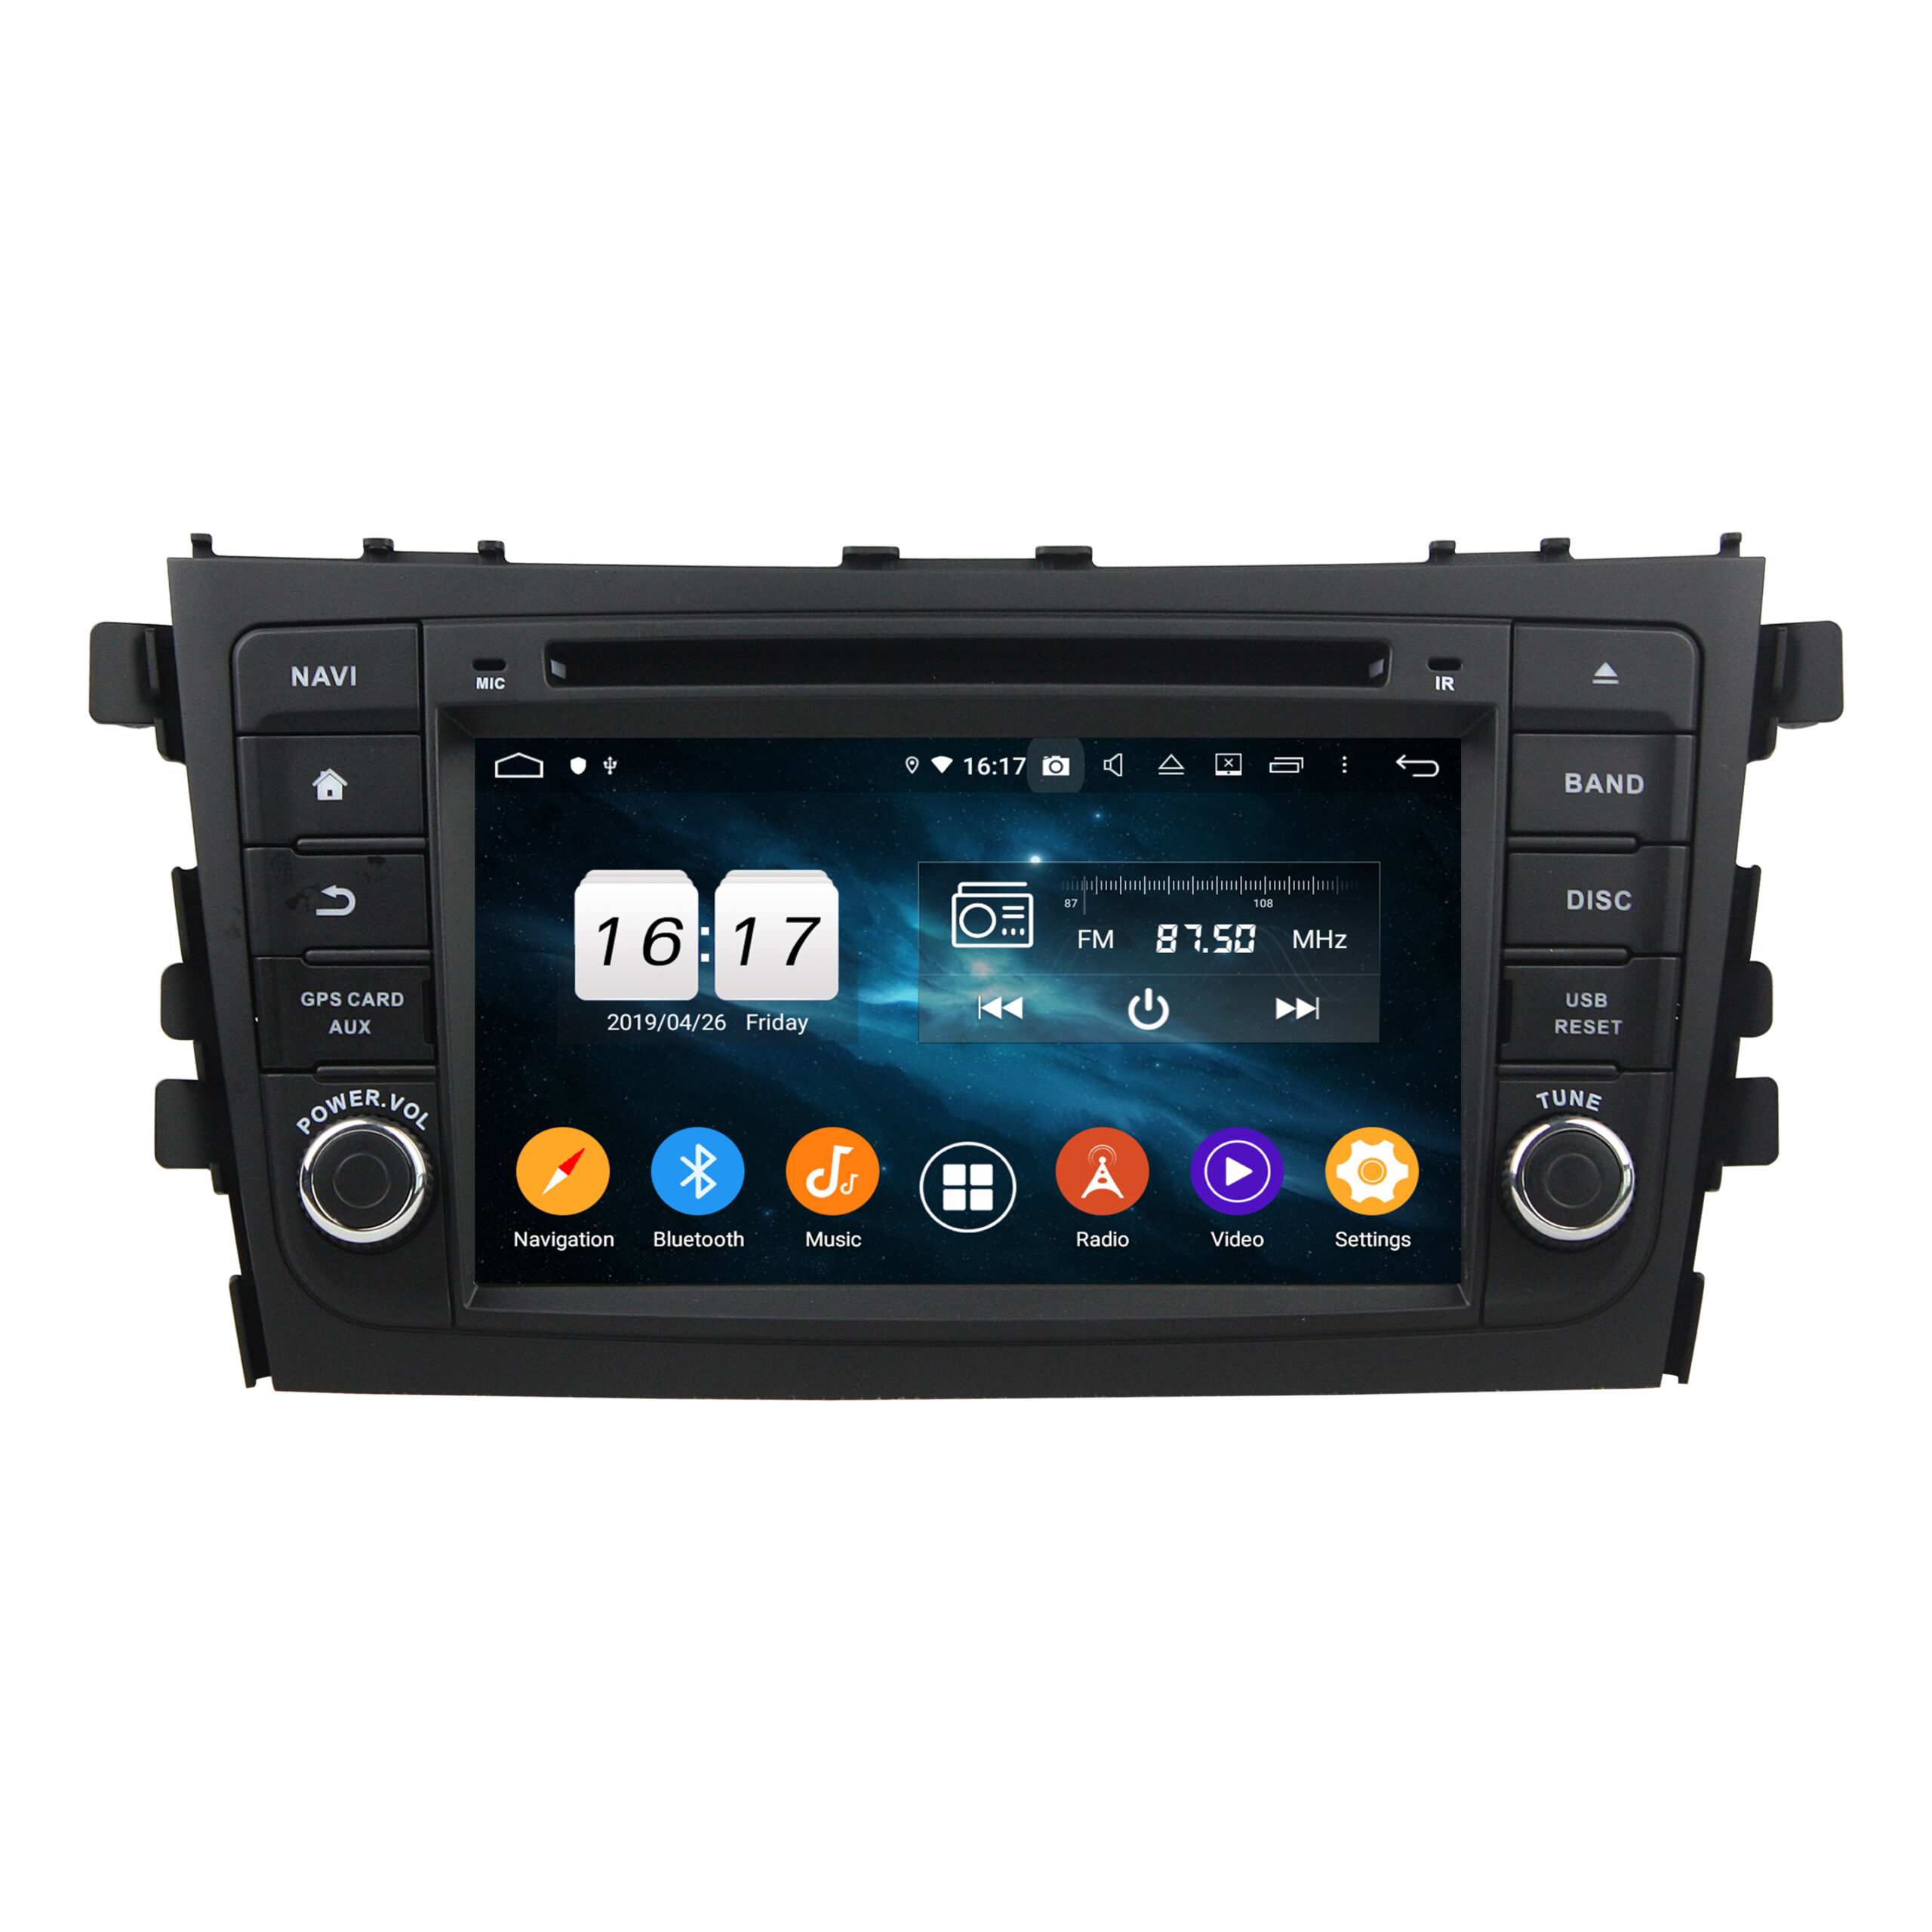 KD-7602 android OEM car stereo Chinese multimedia video car navigation for Suzuki